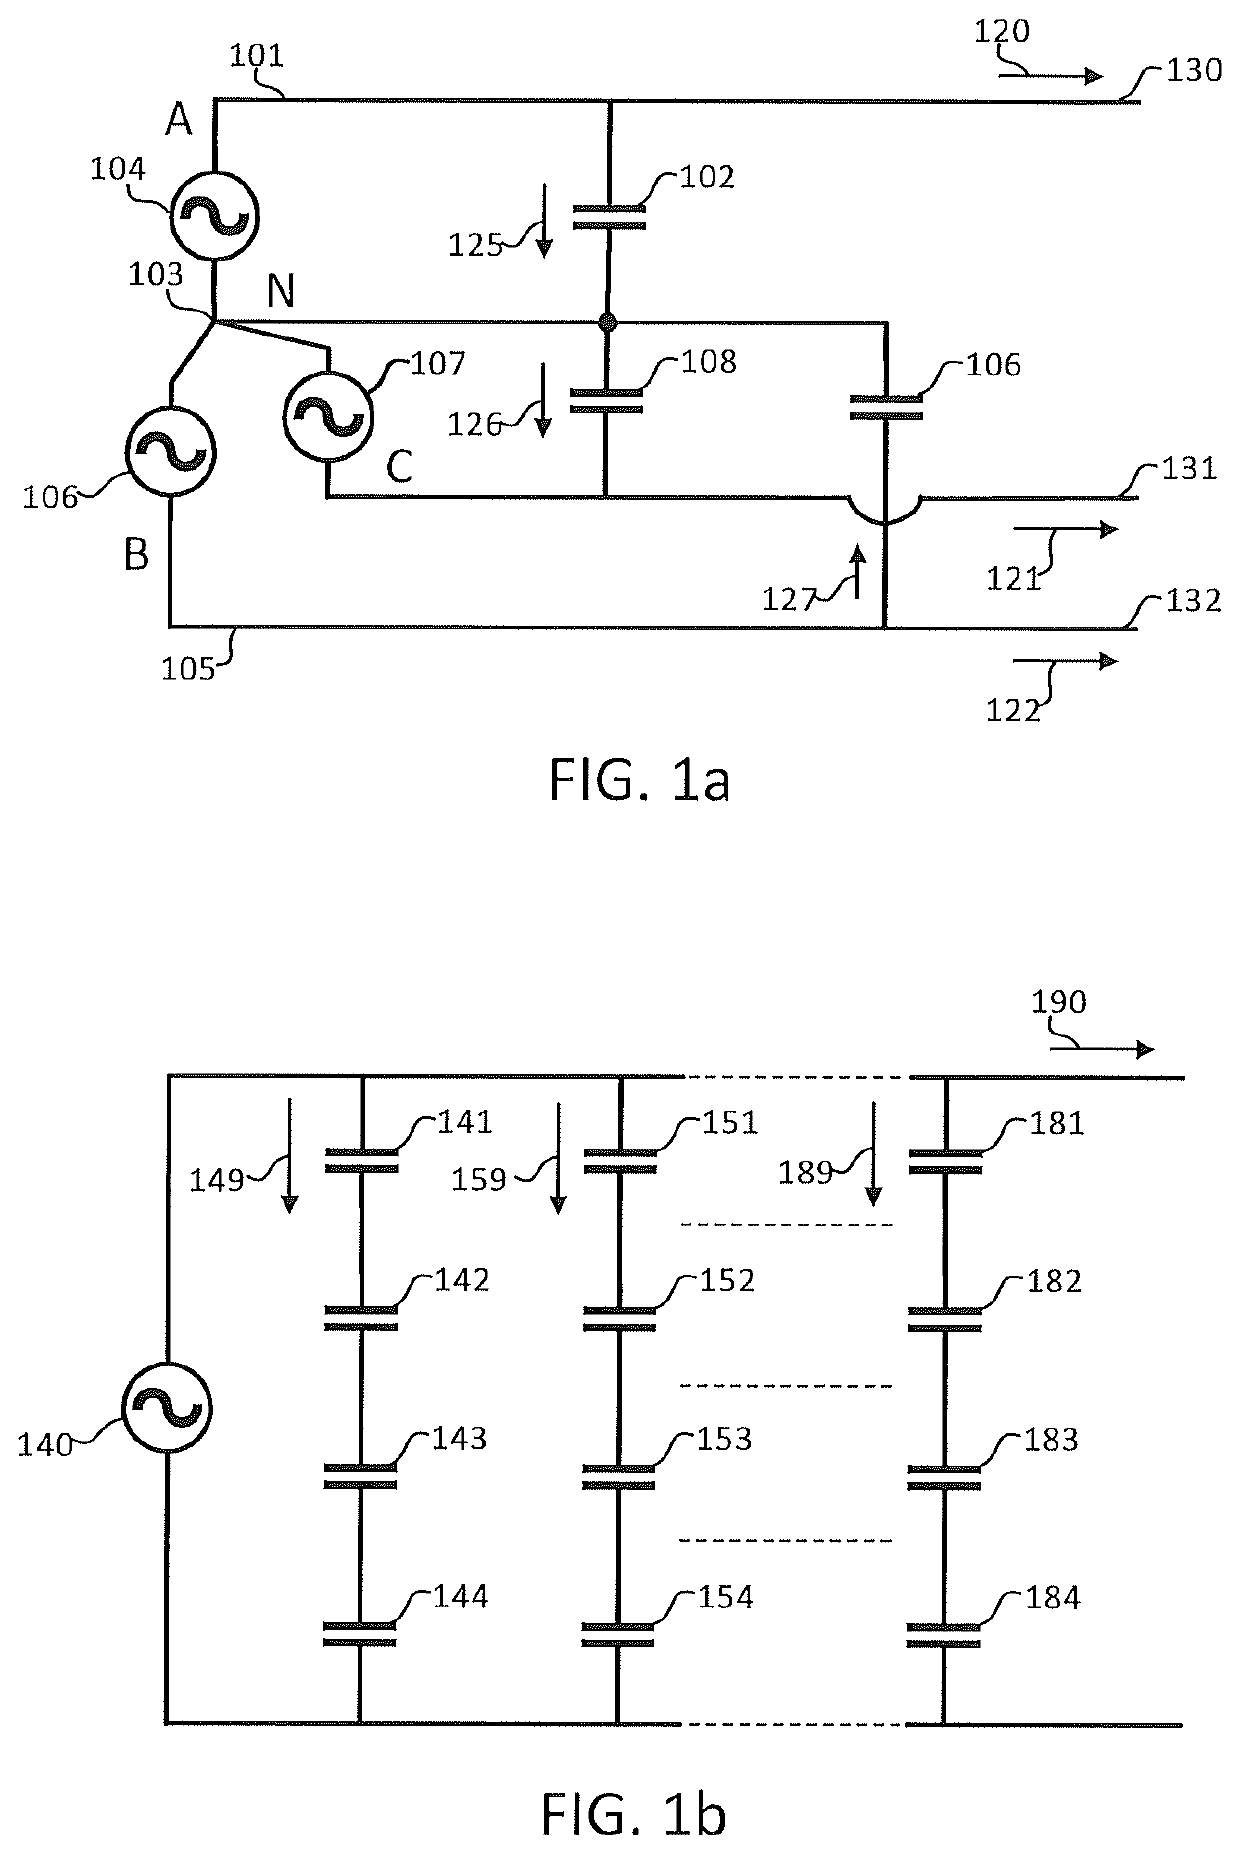 Method and apparatus for monitoring capacitor faults in a capacitor bank